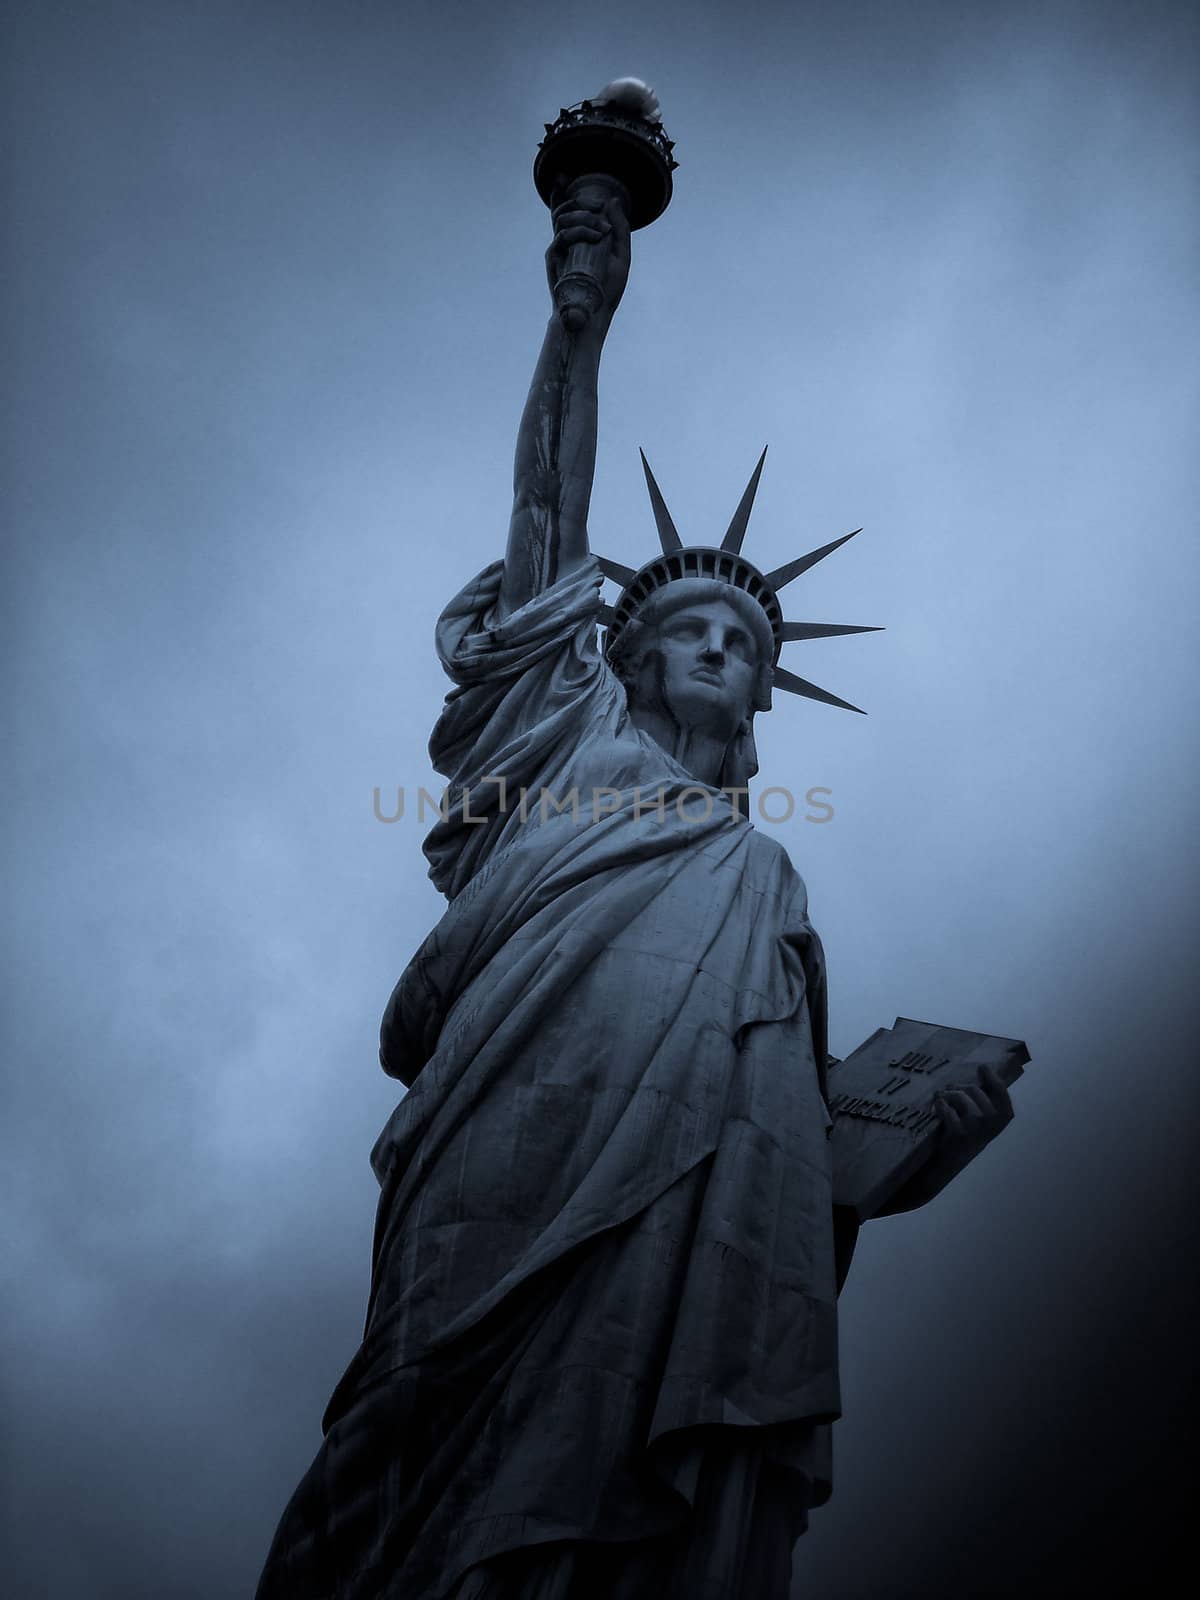 Statue of Liberty, New York by Mbatelier